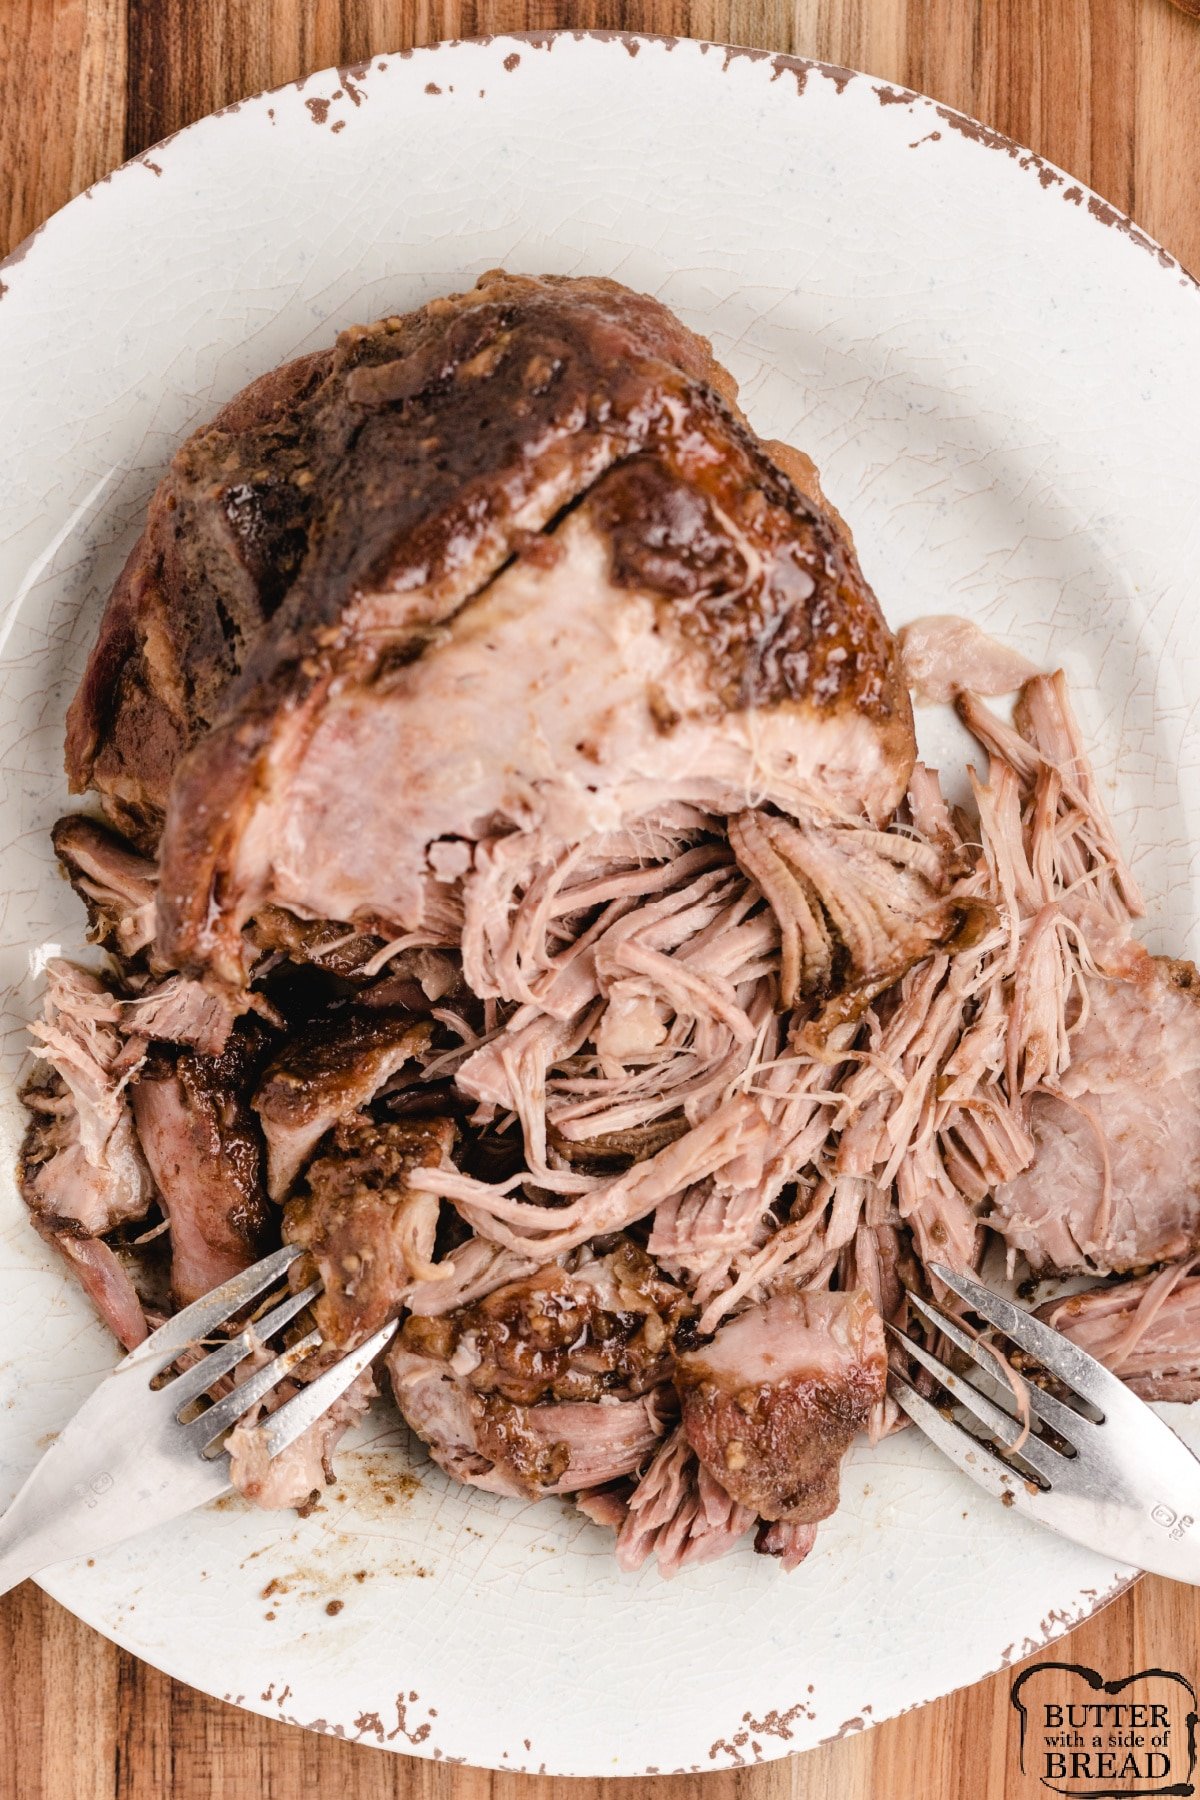 Slow Cooker Brown Sugar Cinnamon Pork Roast made in the crockpot with just a few simple ingredients. Fall-apart tender pork with the most amazing flavors. Instant Pot instructions included!